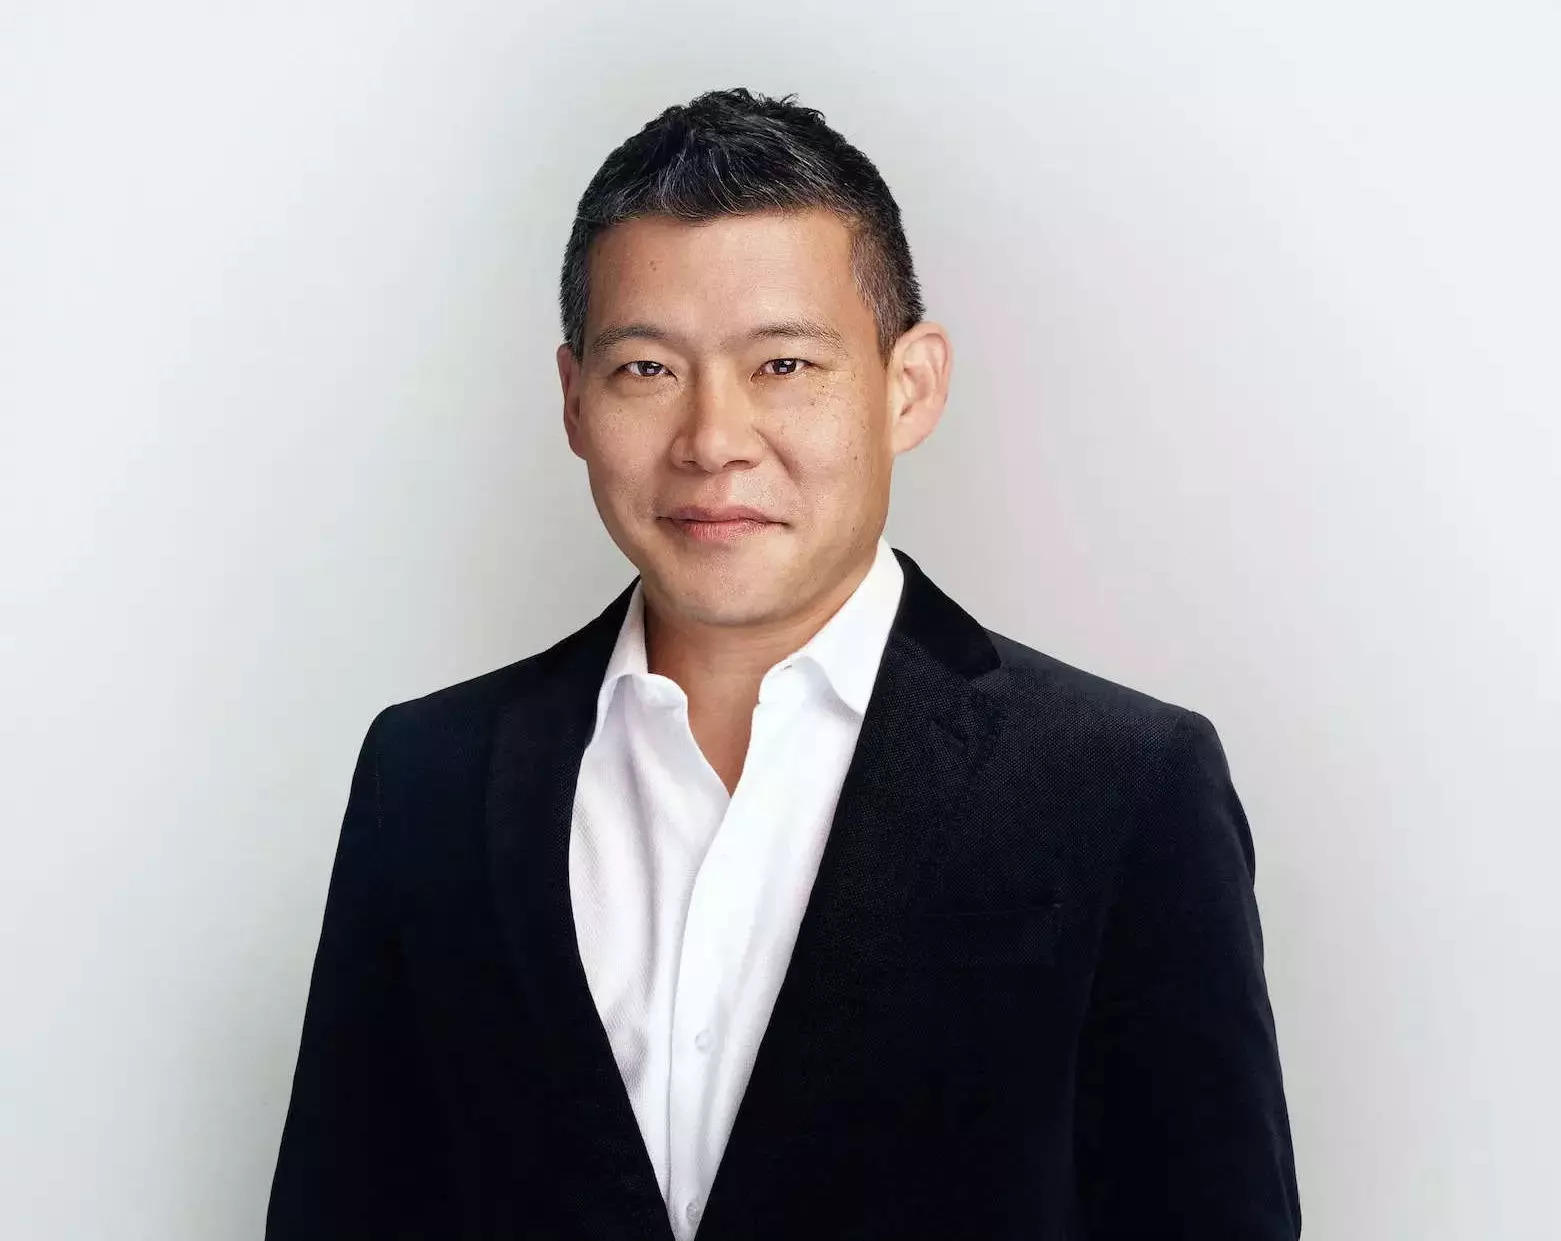 A handout photo of Ervin Tu, who has been named as interim CEO of Naspers and its Dutch subsidiary Prosus.